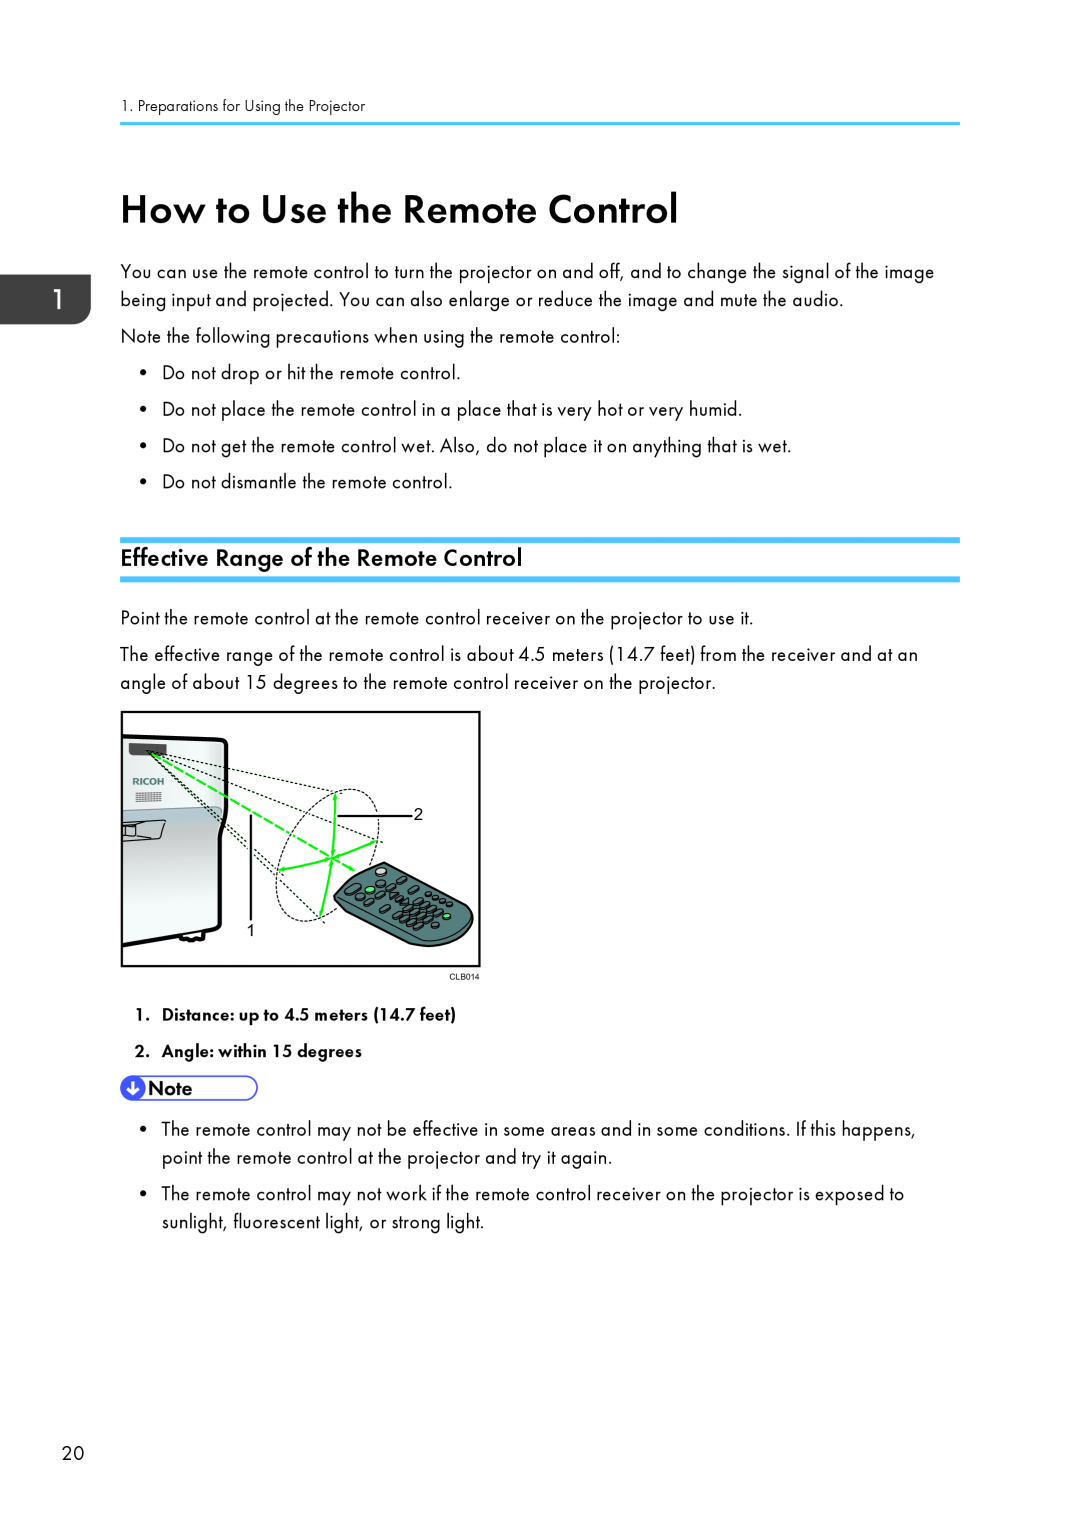 Ricoh WX4130n operating instructions How to Use the Remote Control, Effective Range of the Remote Control 